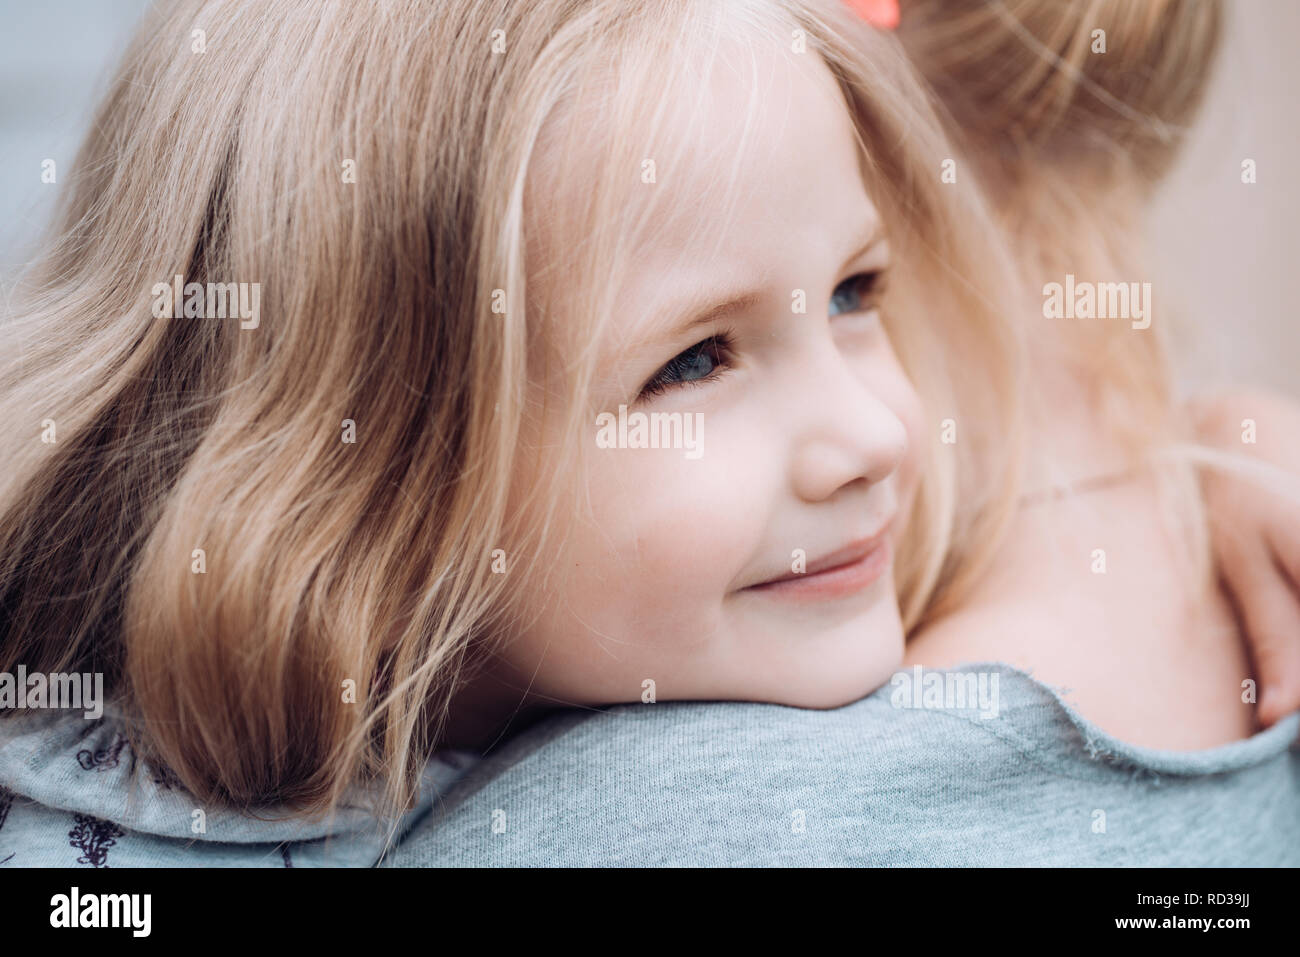 New Life Concept Family Values I Love You Childrens Day Small Baby Girl Little Girl Embrace Her Mother Summer Mothers Day Love In Family Childhood Having Rest Stock Photo Alamy